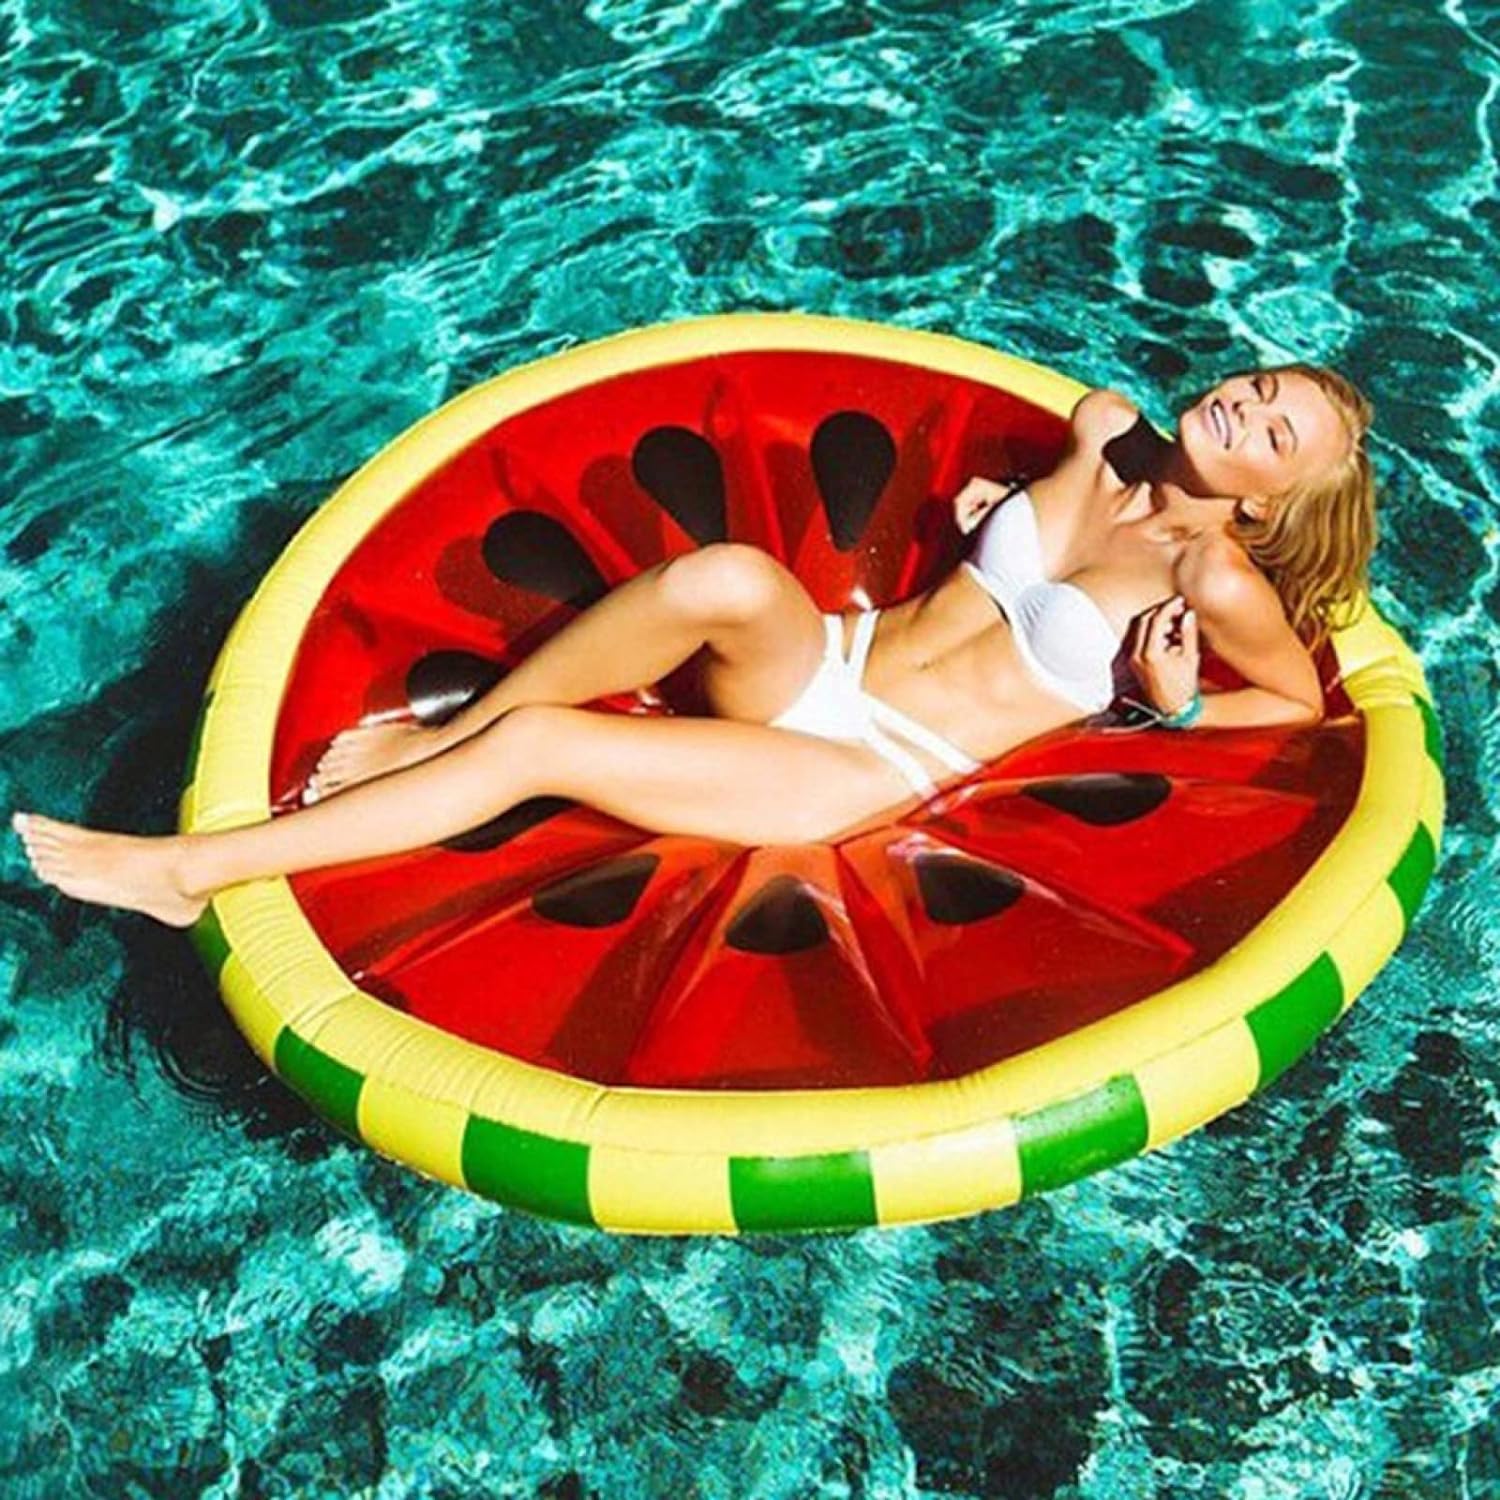 Escape The Heat This Summer: Float The Days Away On A Giant Inflatable Oasis